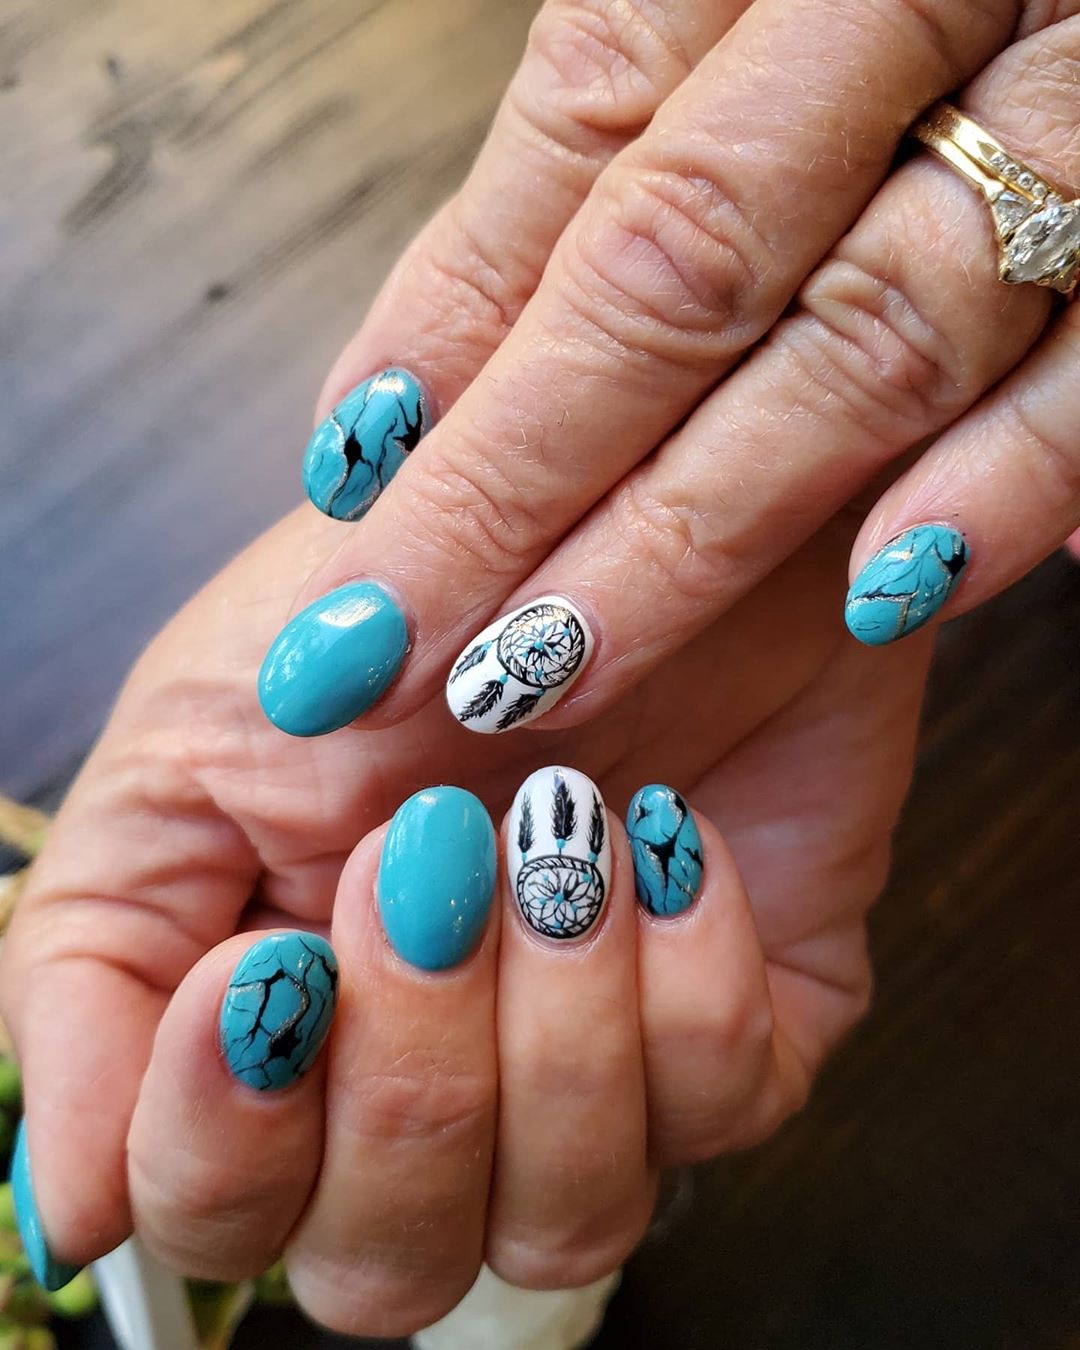 20 Stunning Designs For Short Acrylic Nails In All Shapes